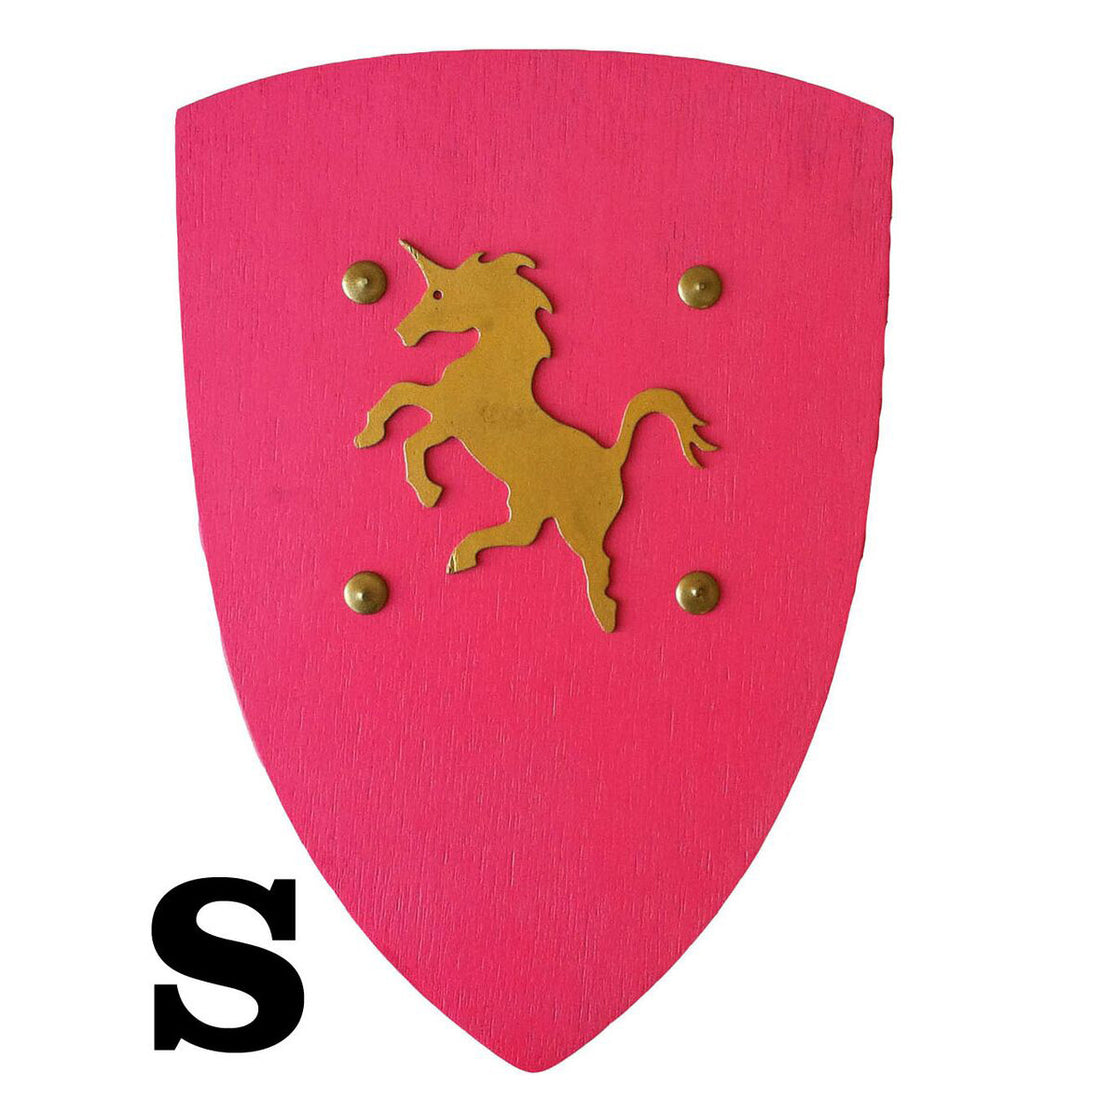 kàlid-medieval-shield-kamelot-small-with-relief-motif-pink-01